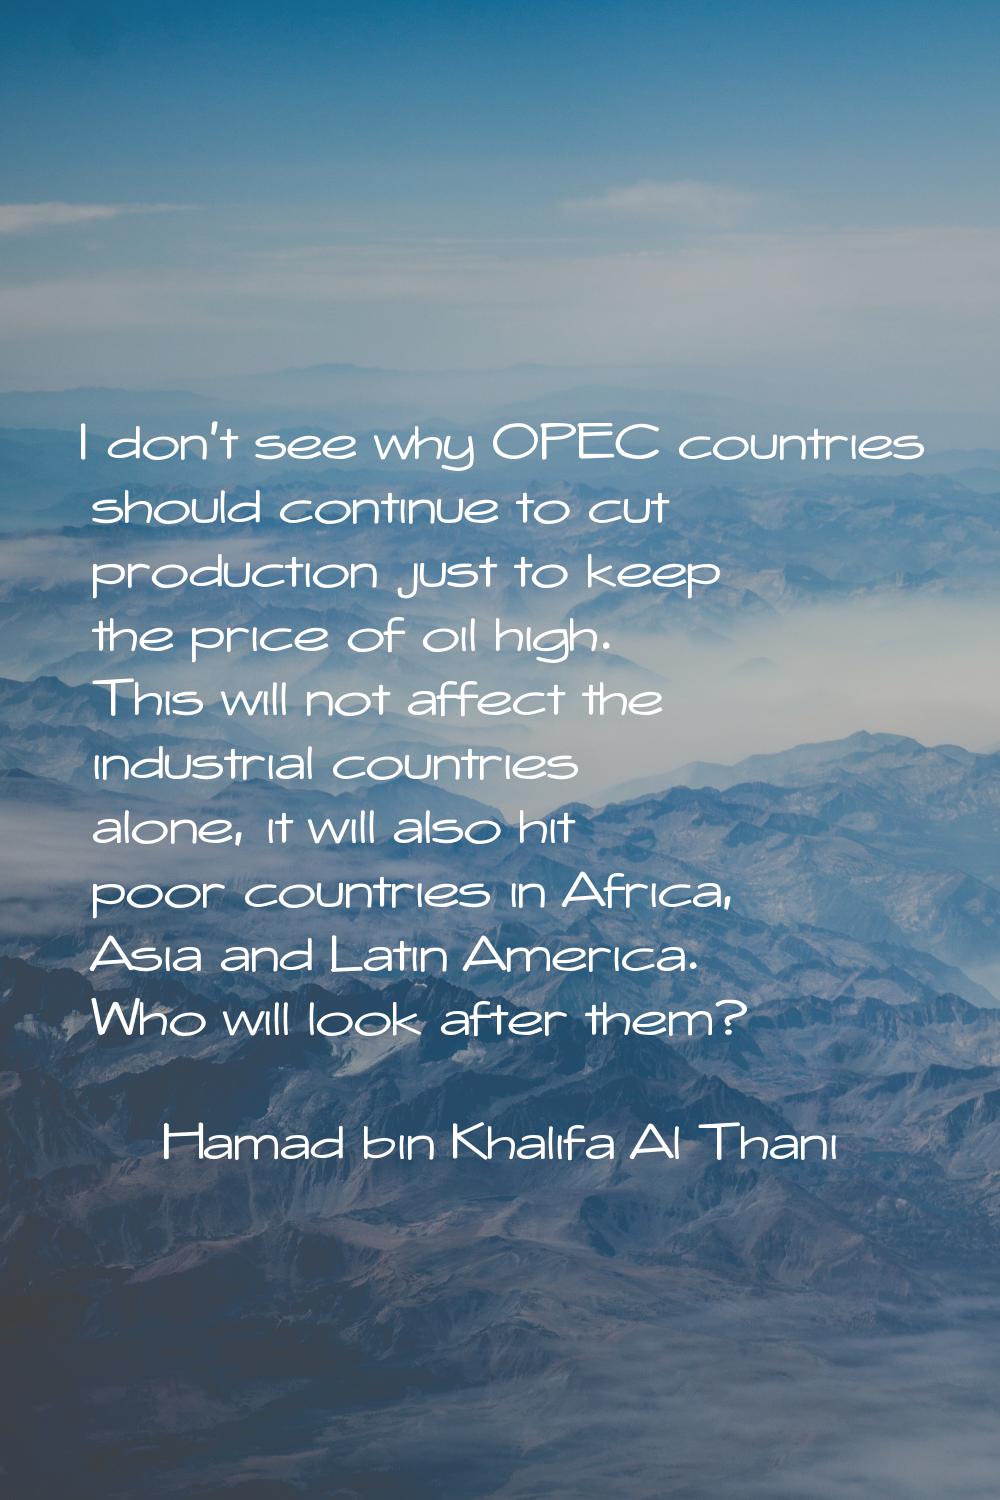 I don't see why OPEC countries should continue to cut production just to keep the price of oil high